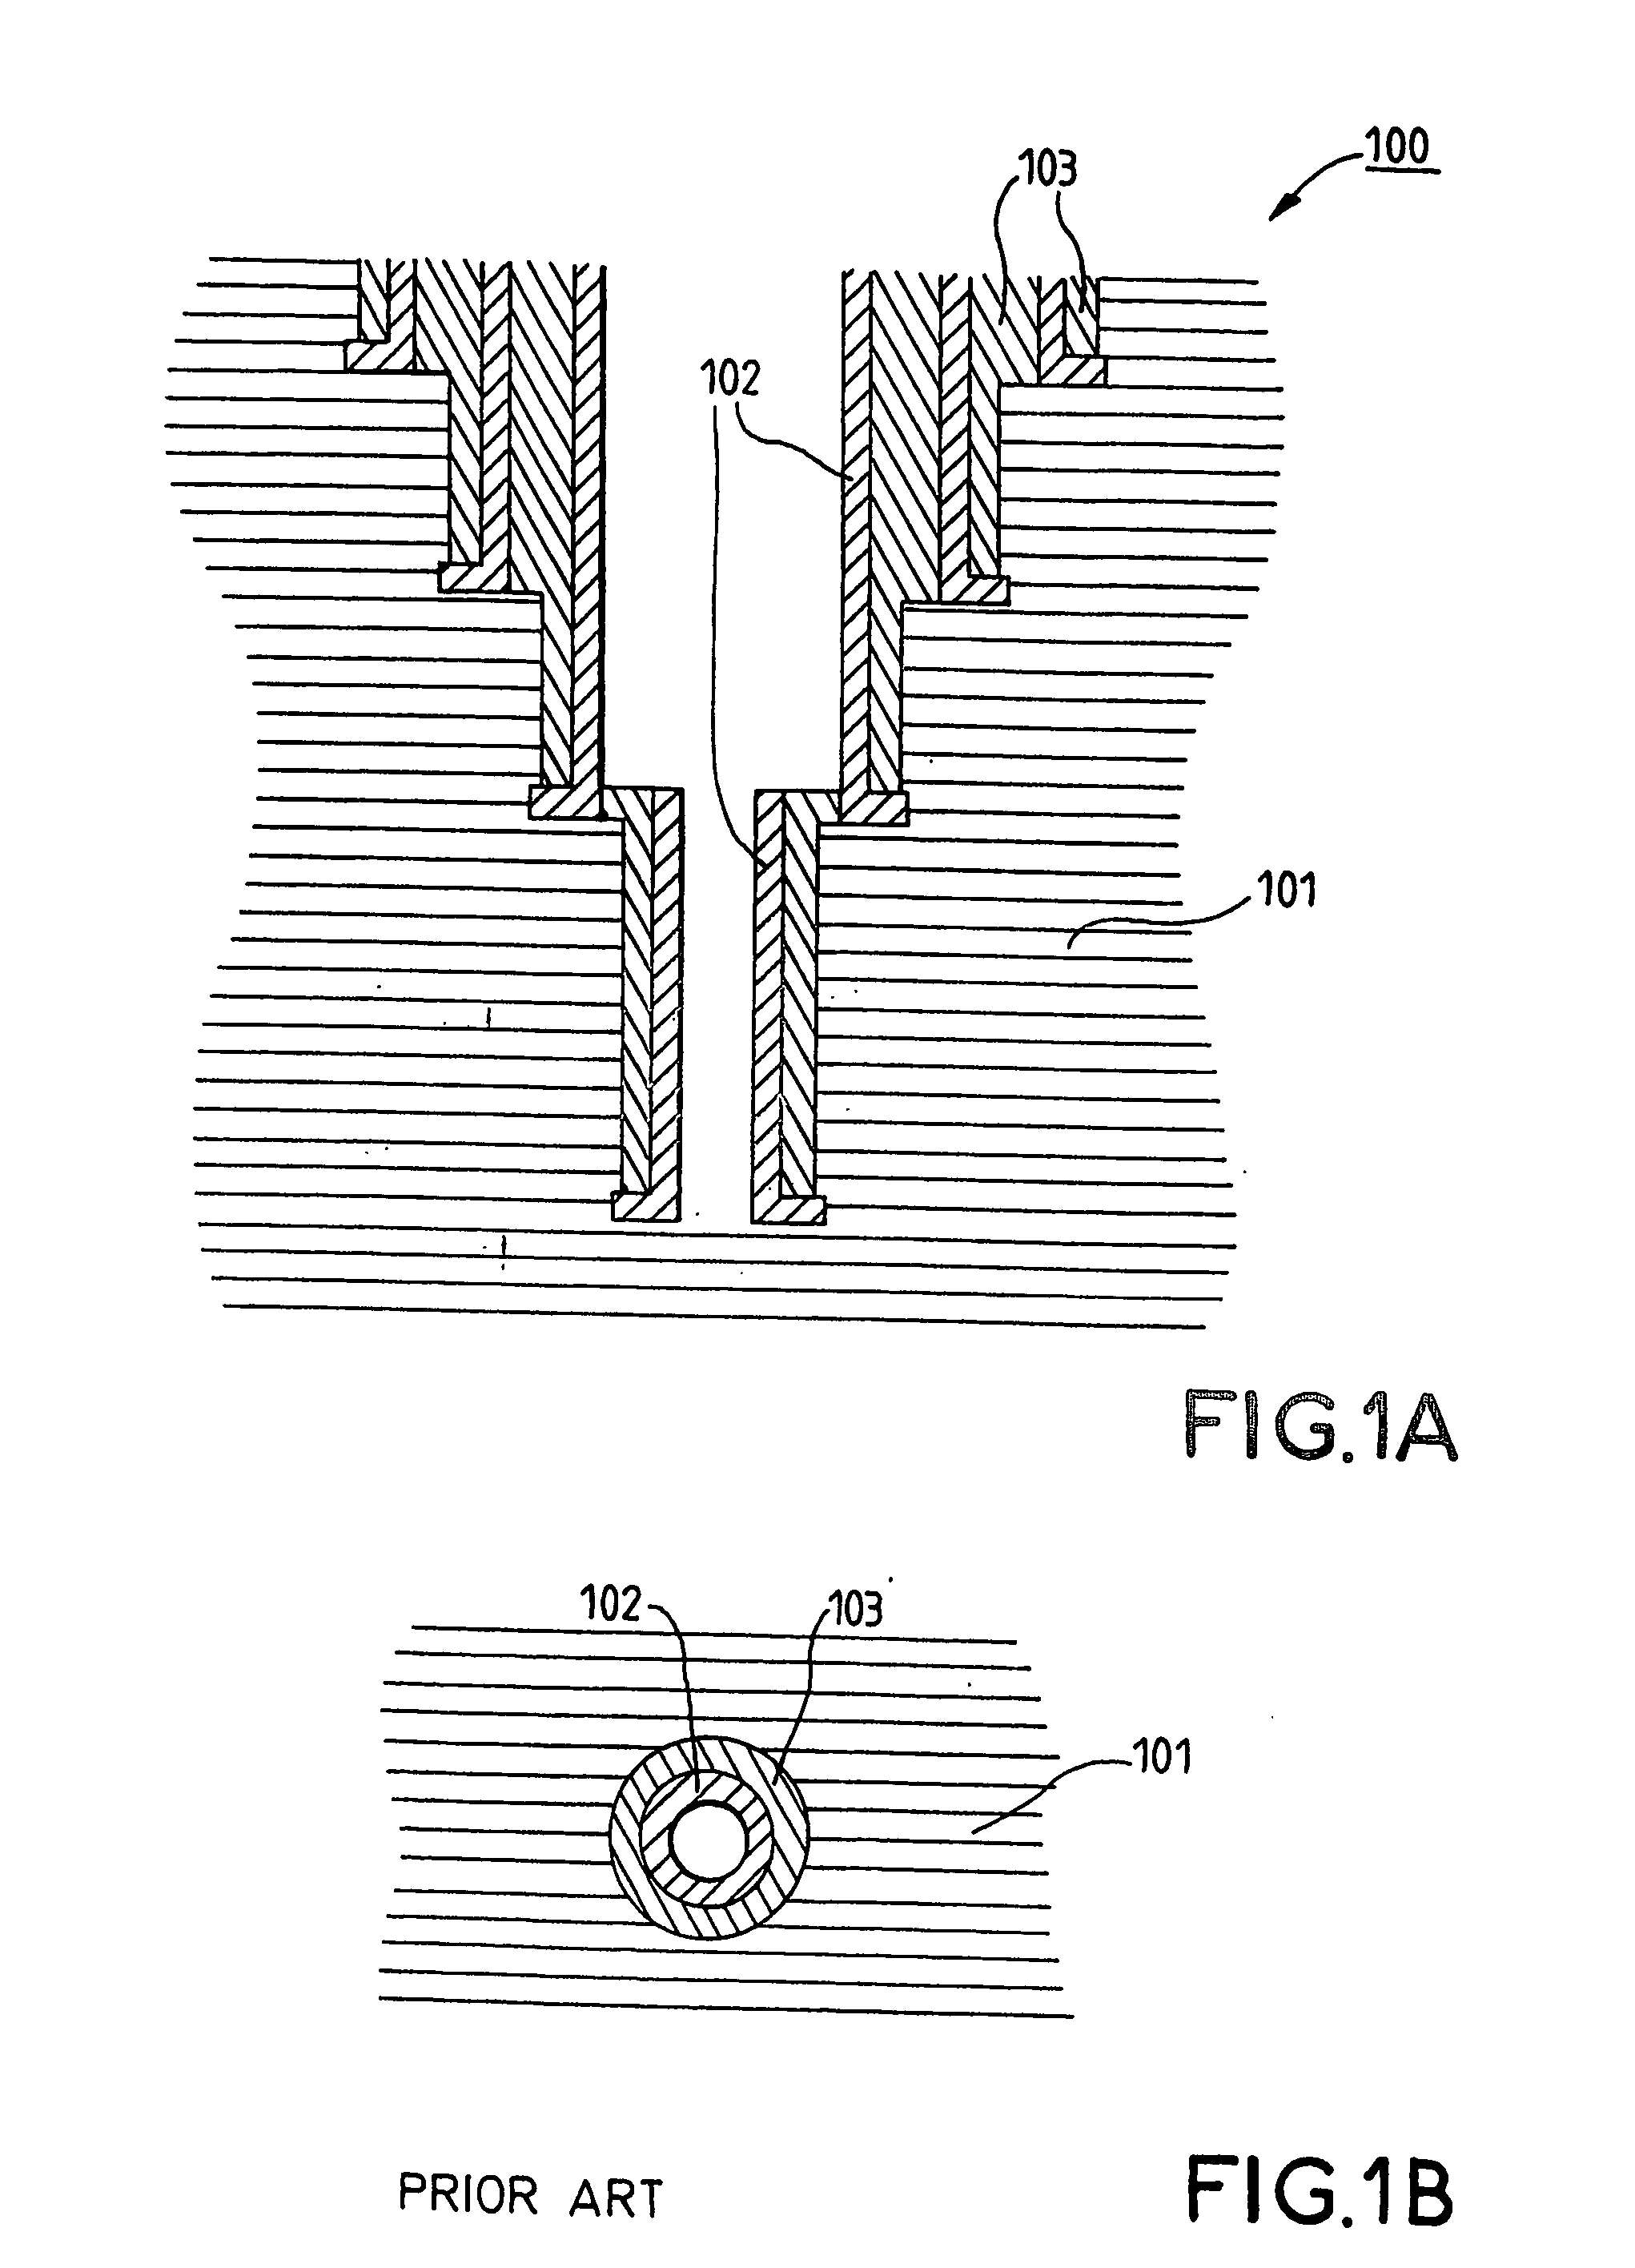 Method for cement bond evaluation in boreholes